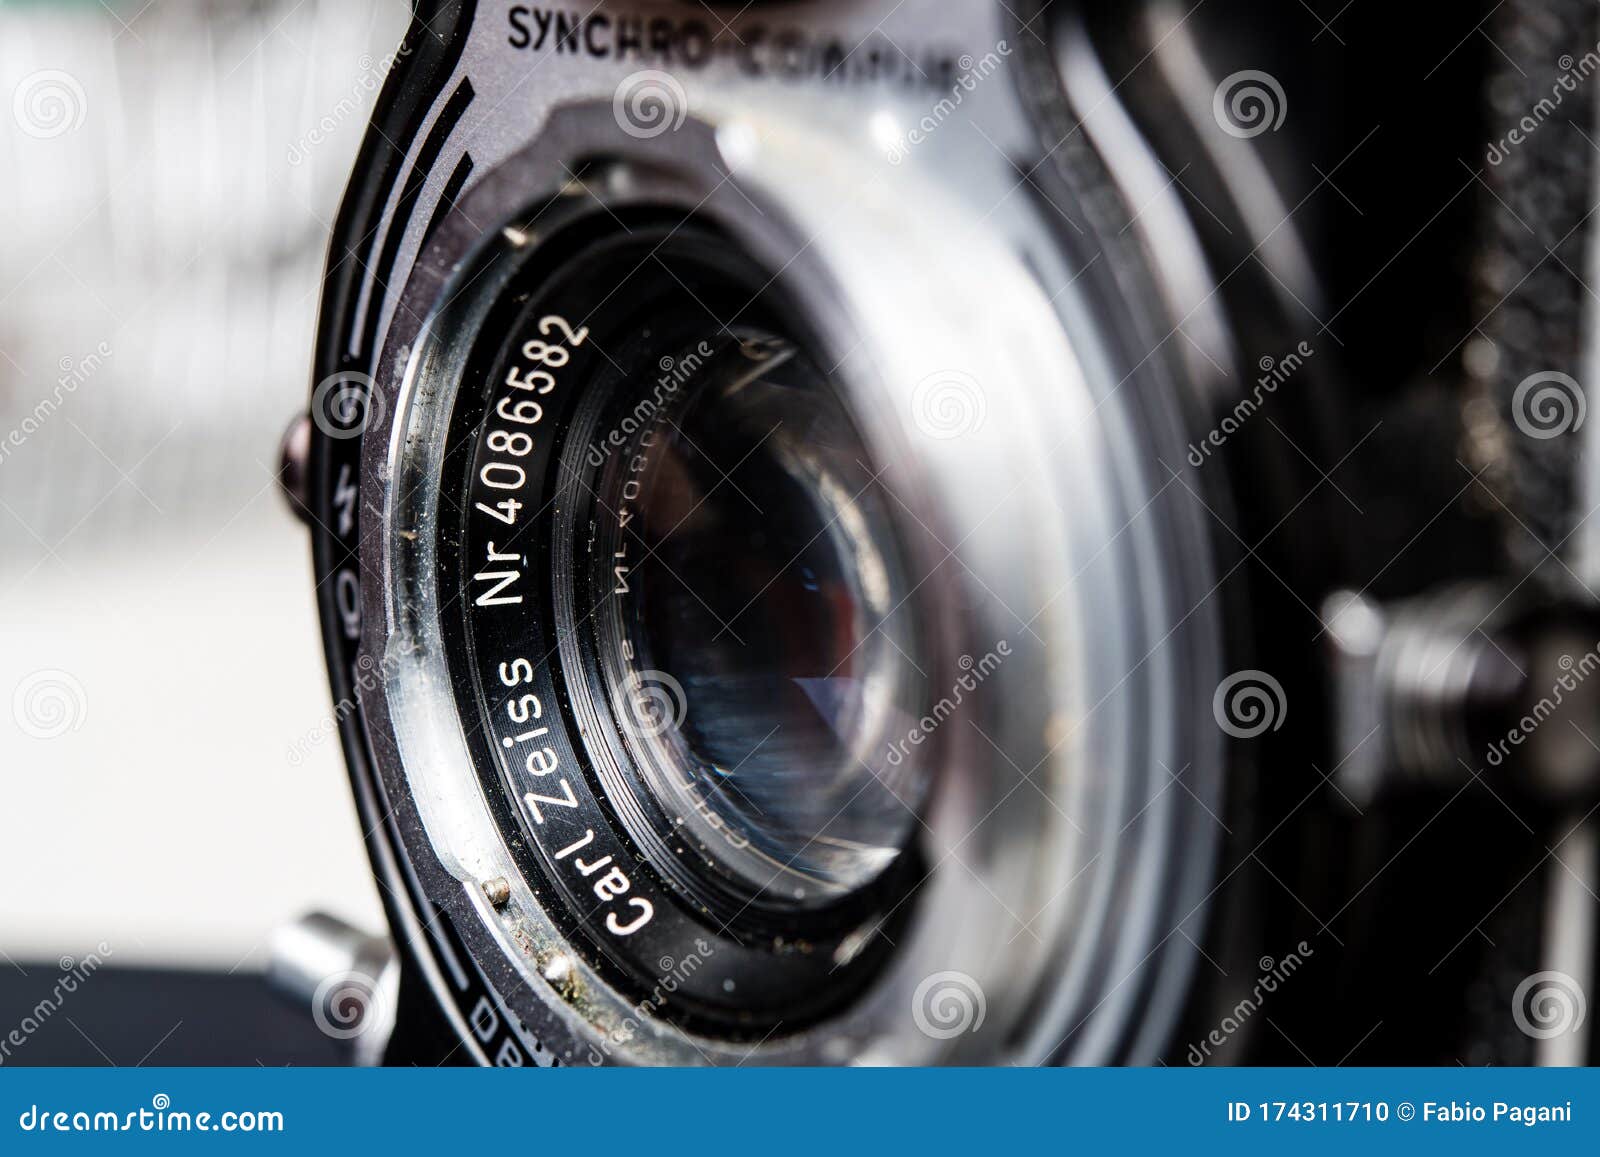 Carl Zeiss Lens Name Detail on Vintage Retro Rolleiflex Photo Camera Lens  Editorial Image Image of macro, close: 174311710